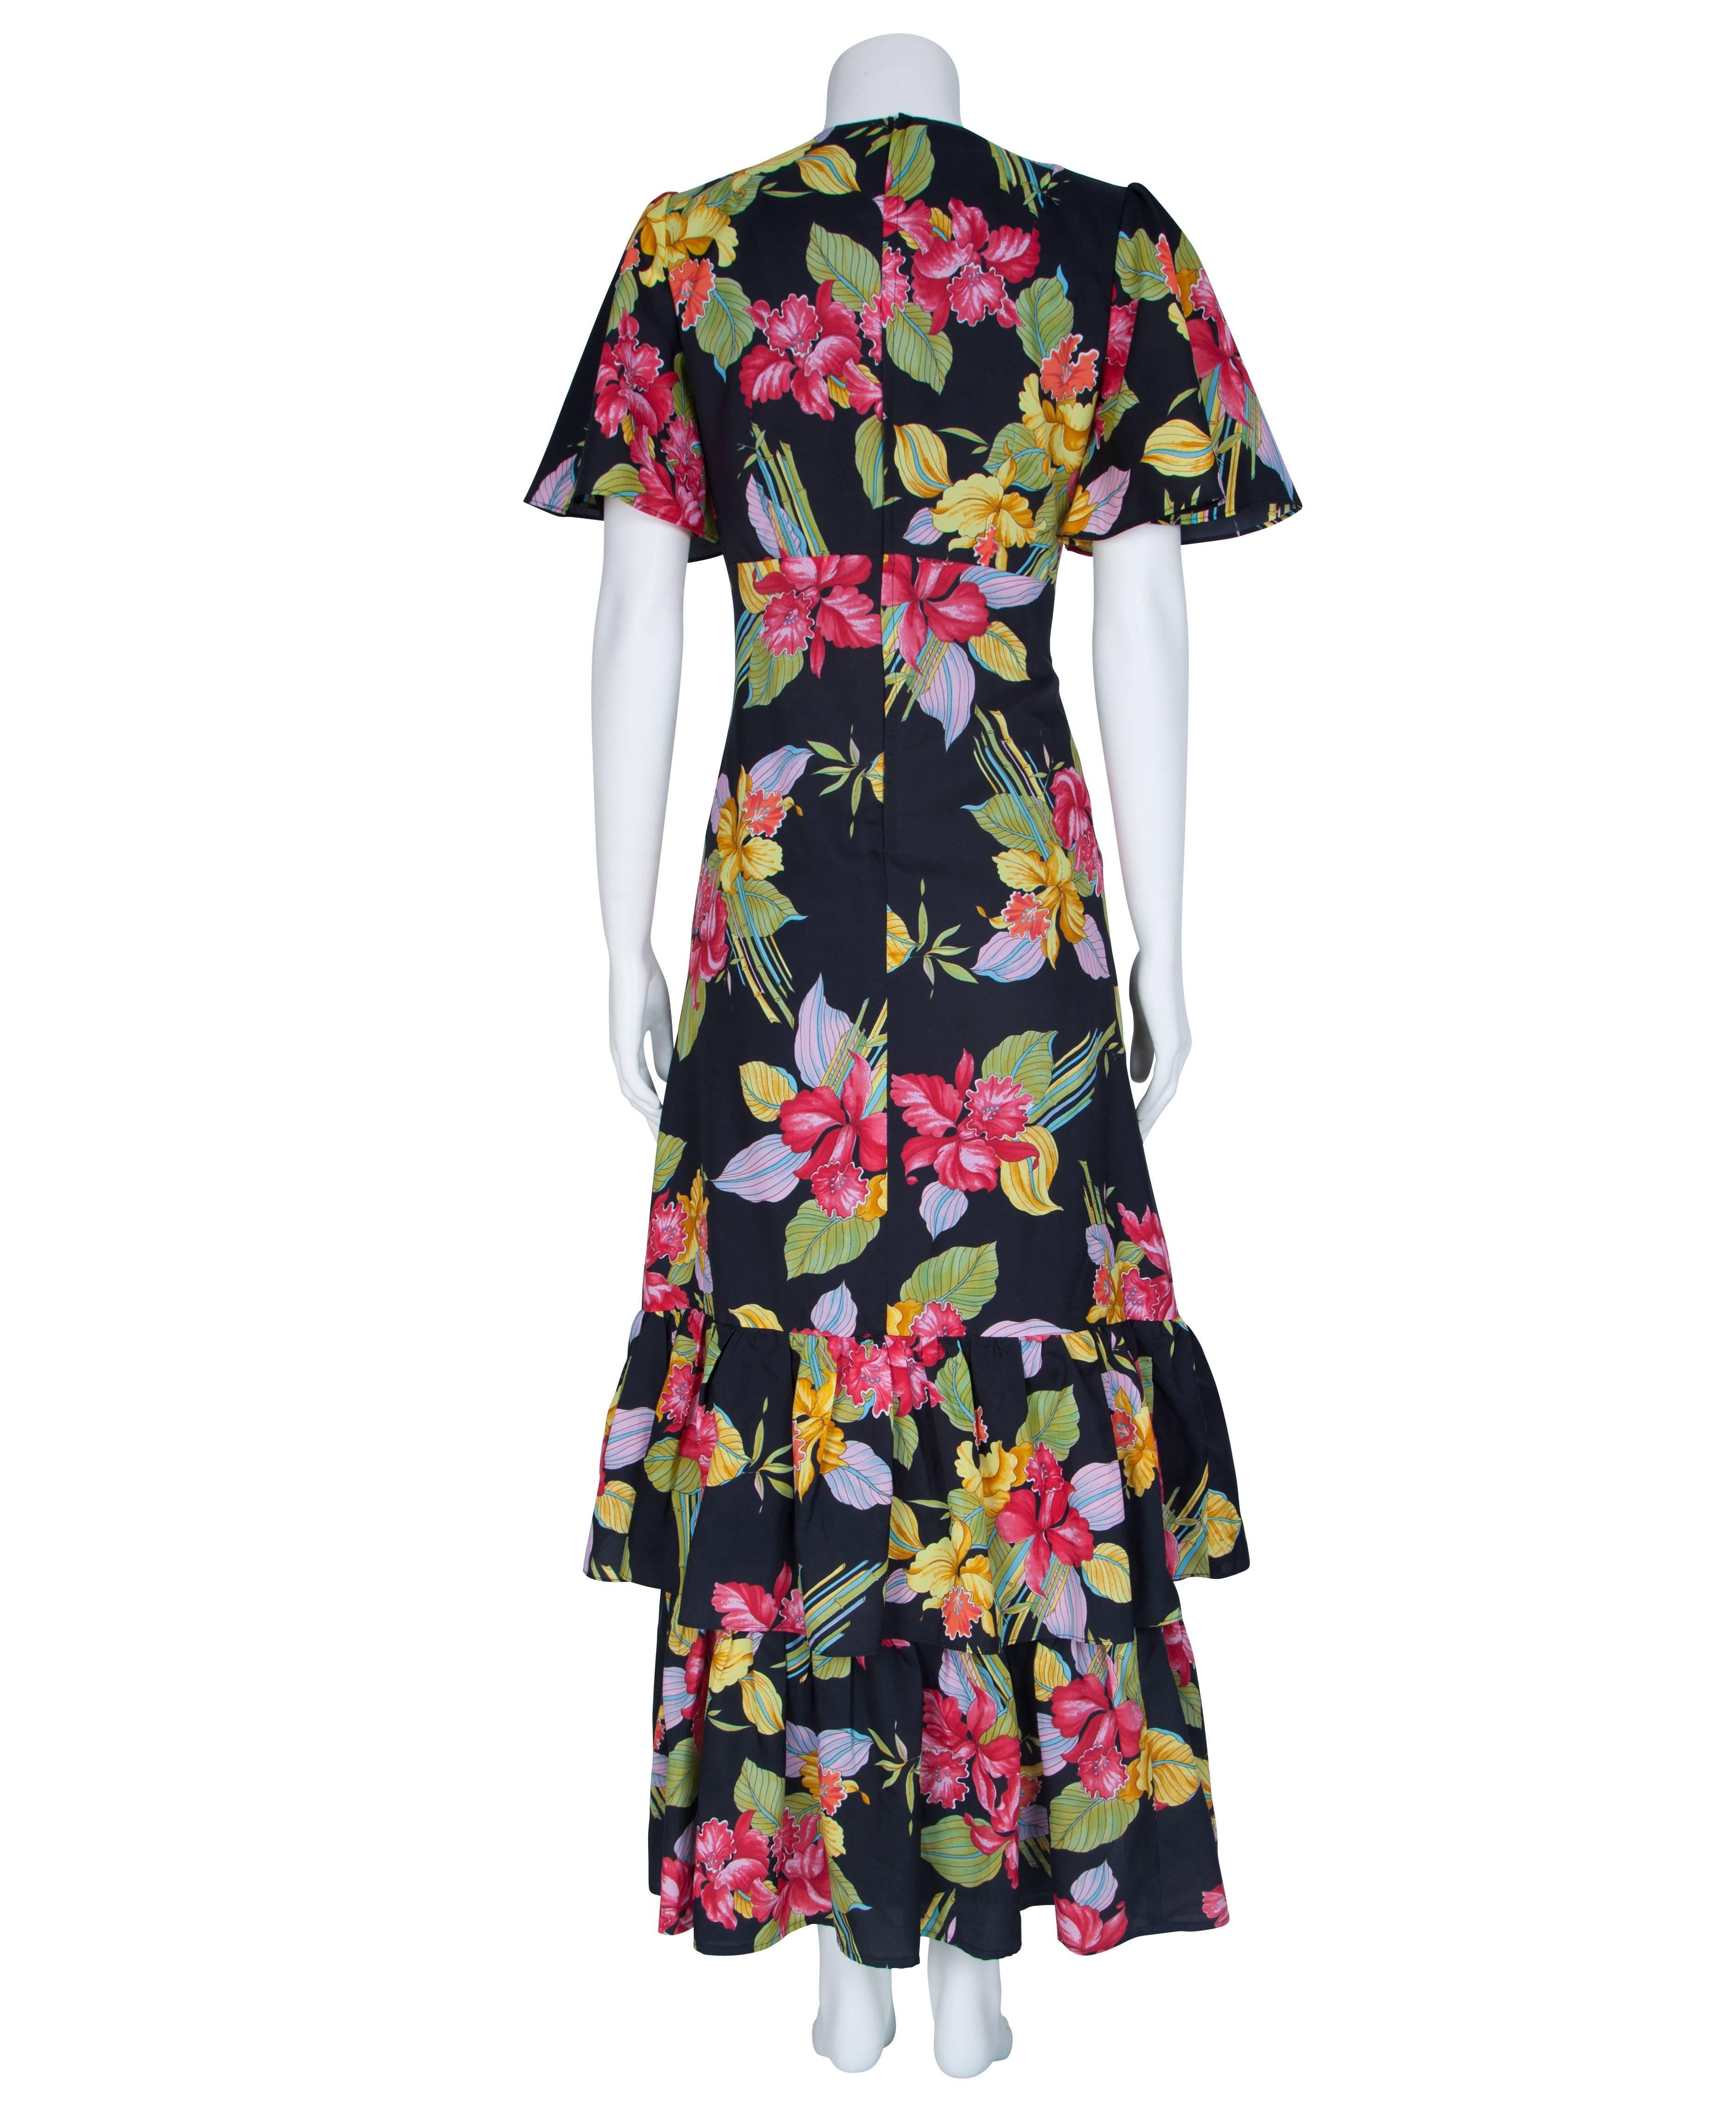 Women's 1970's Black Floral Ruffled 2-in-1 Dress with Capelet Sleeves For Sale